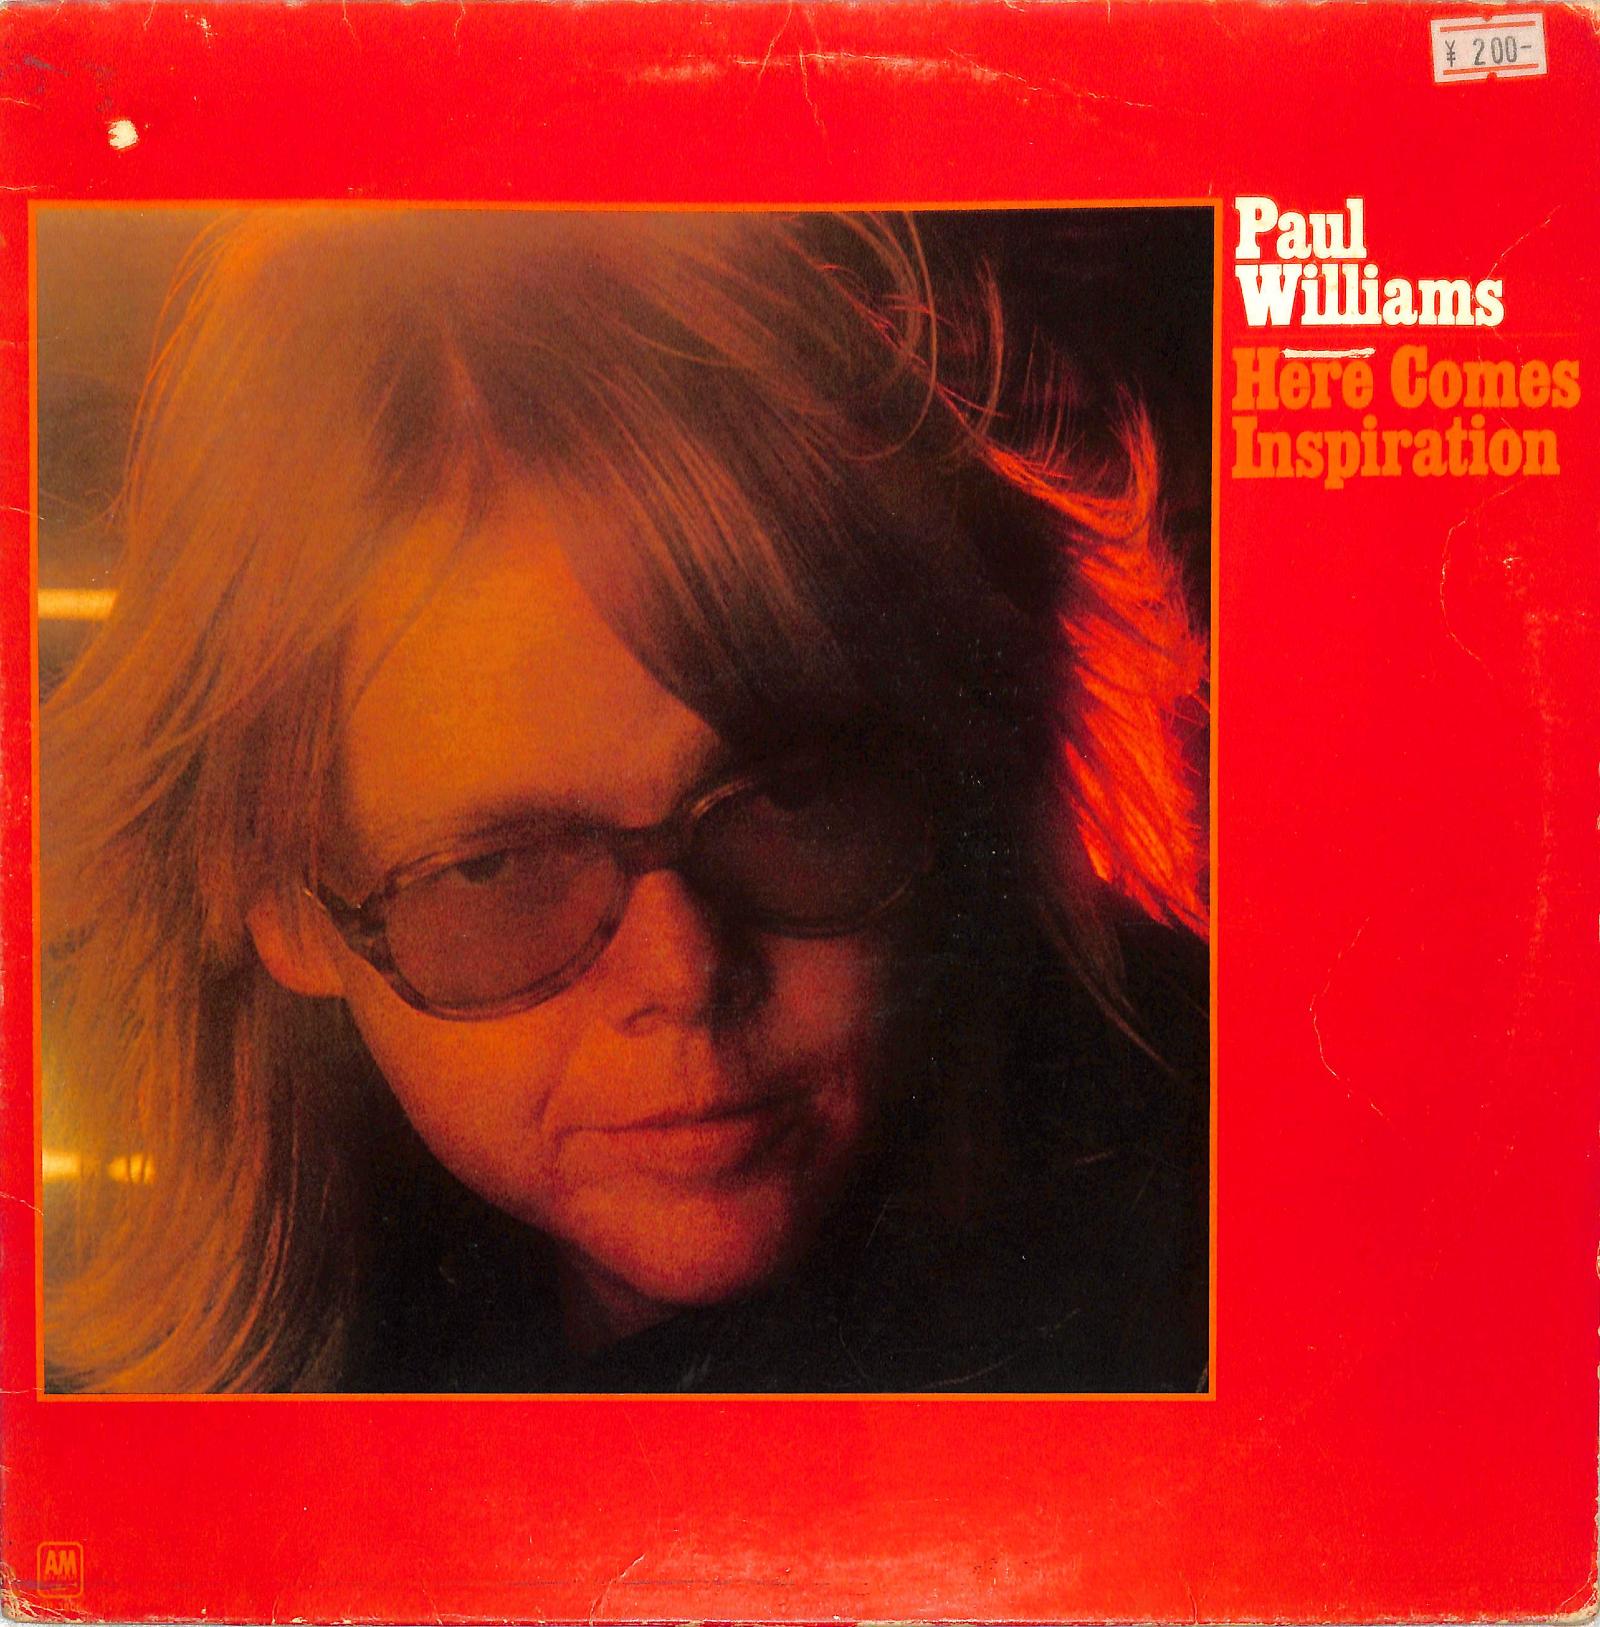 PAUL WILLIAMS - Here Comes Inspiration